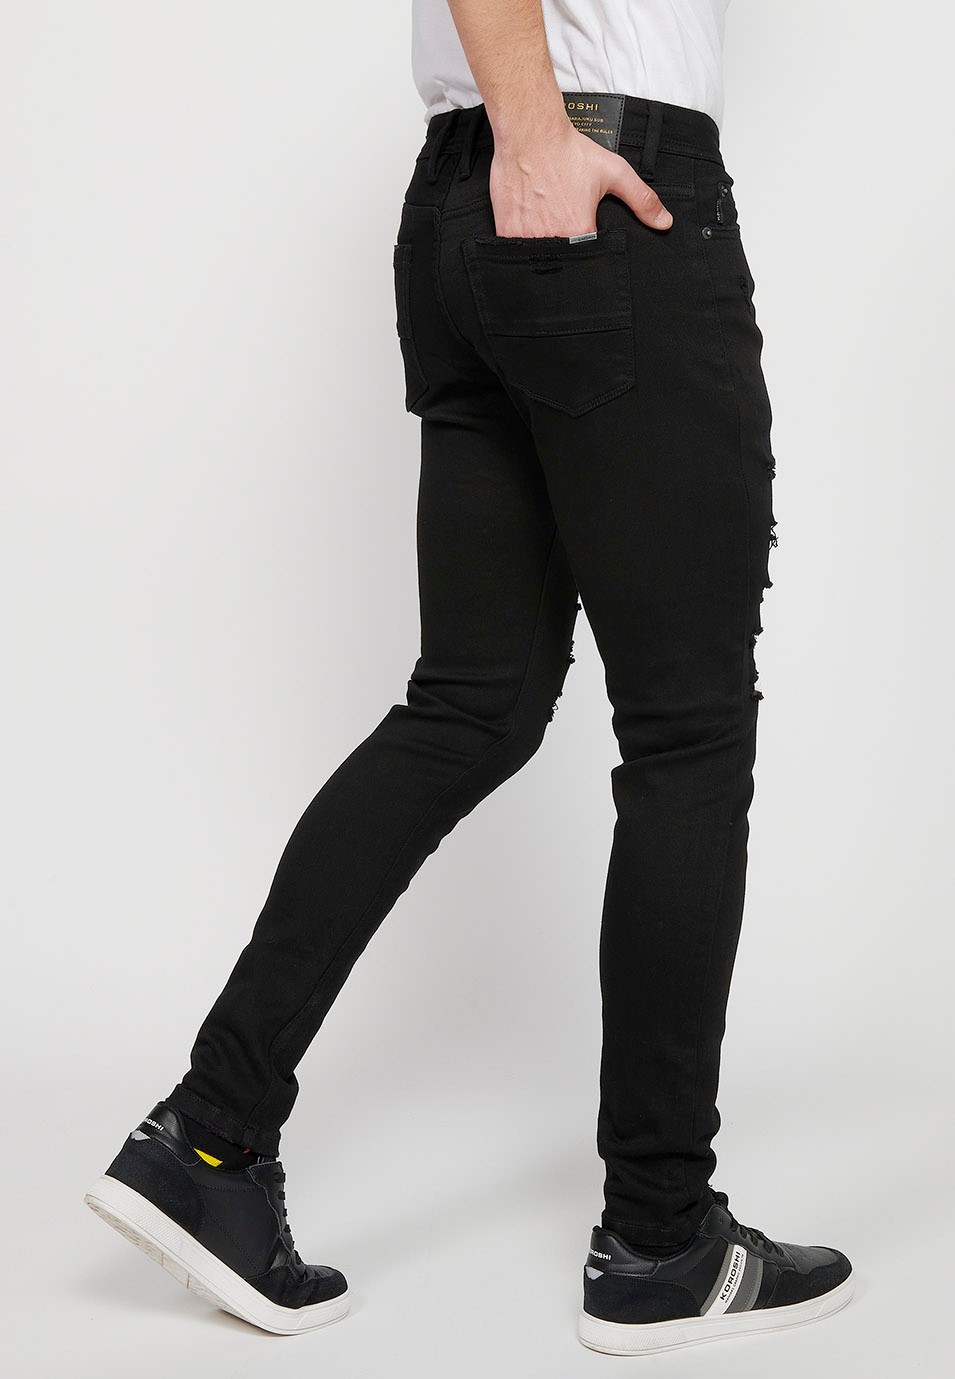 Long slim super skinny jeans with front closure with zipper and button in Black Denim Color for Men 9